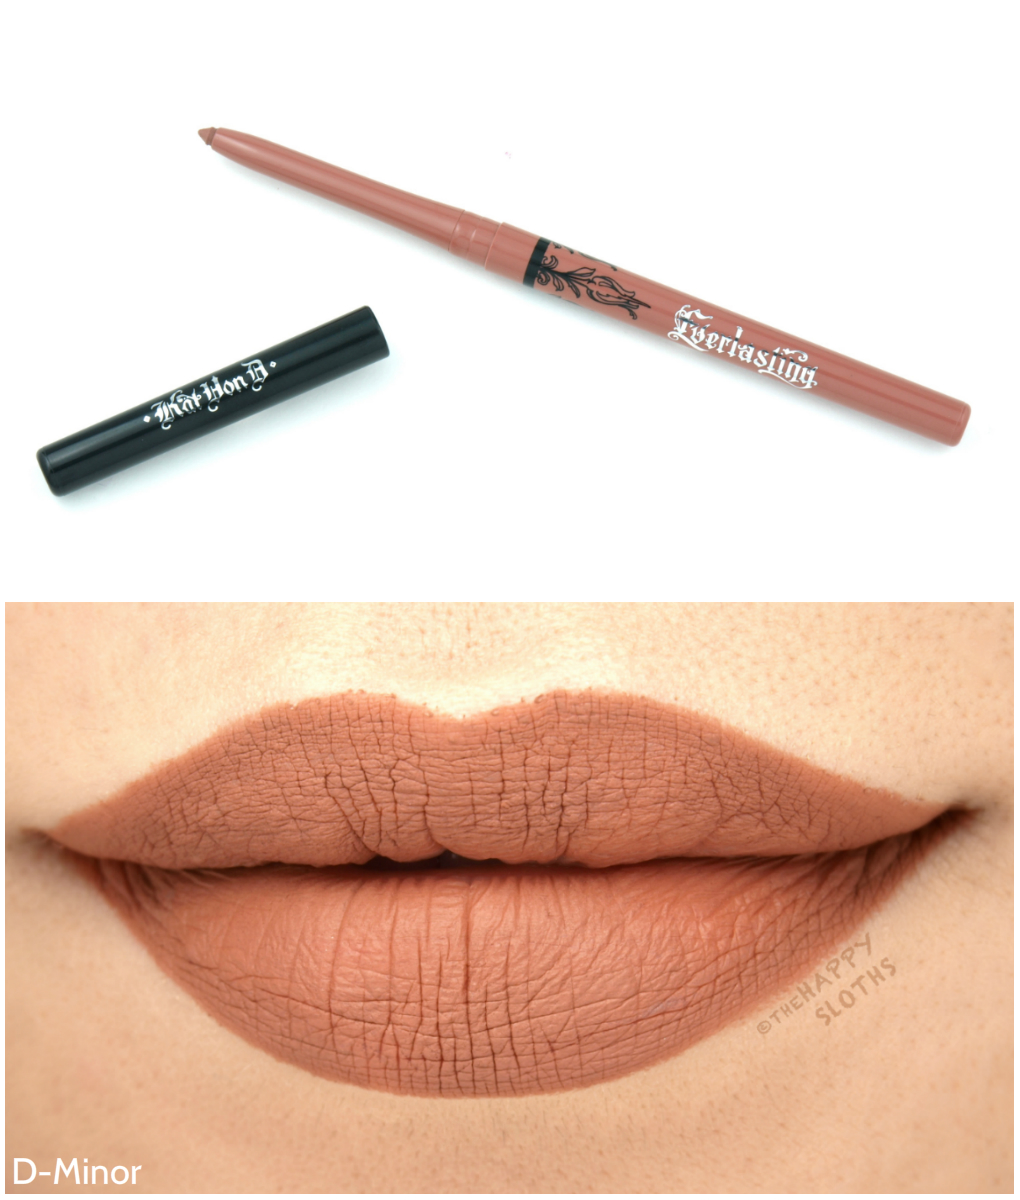 Kat Von D Everlasting Lip Liner in "D-Minor": Review and Swatches